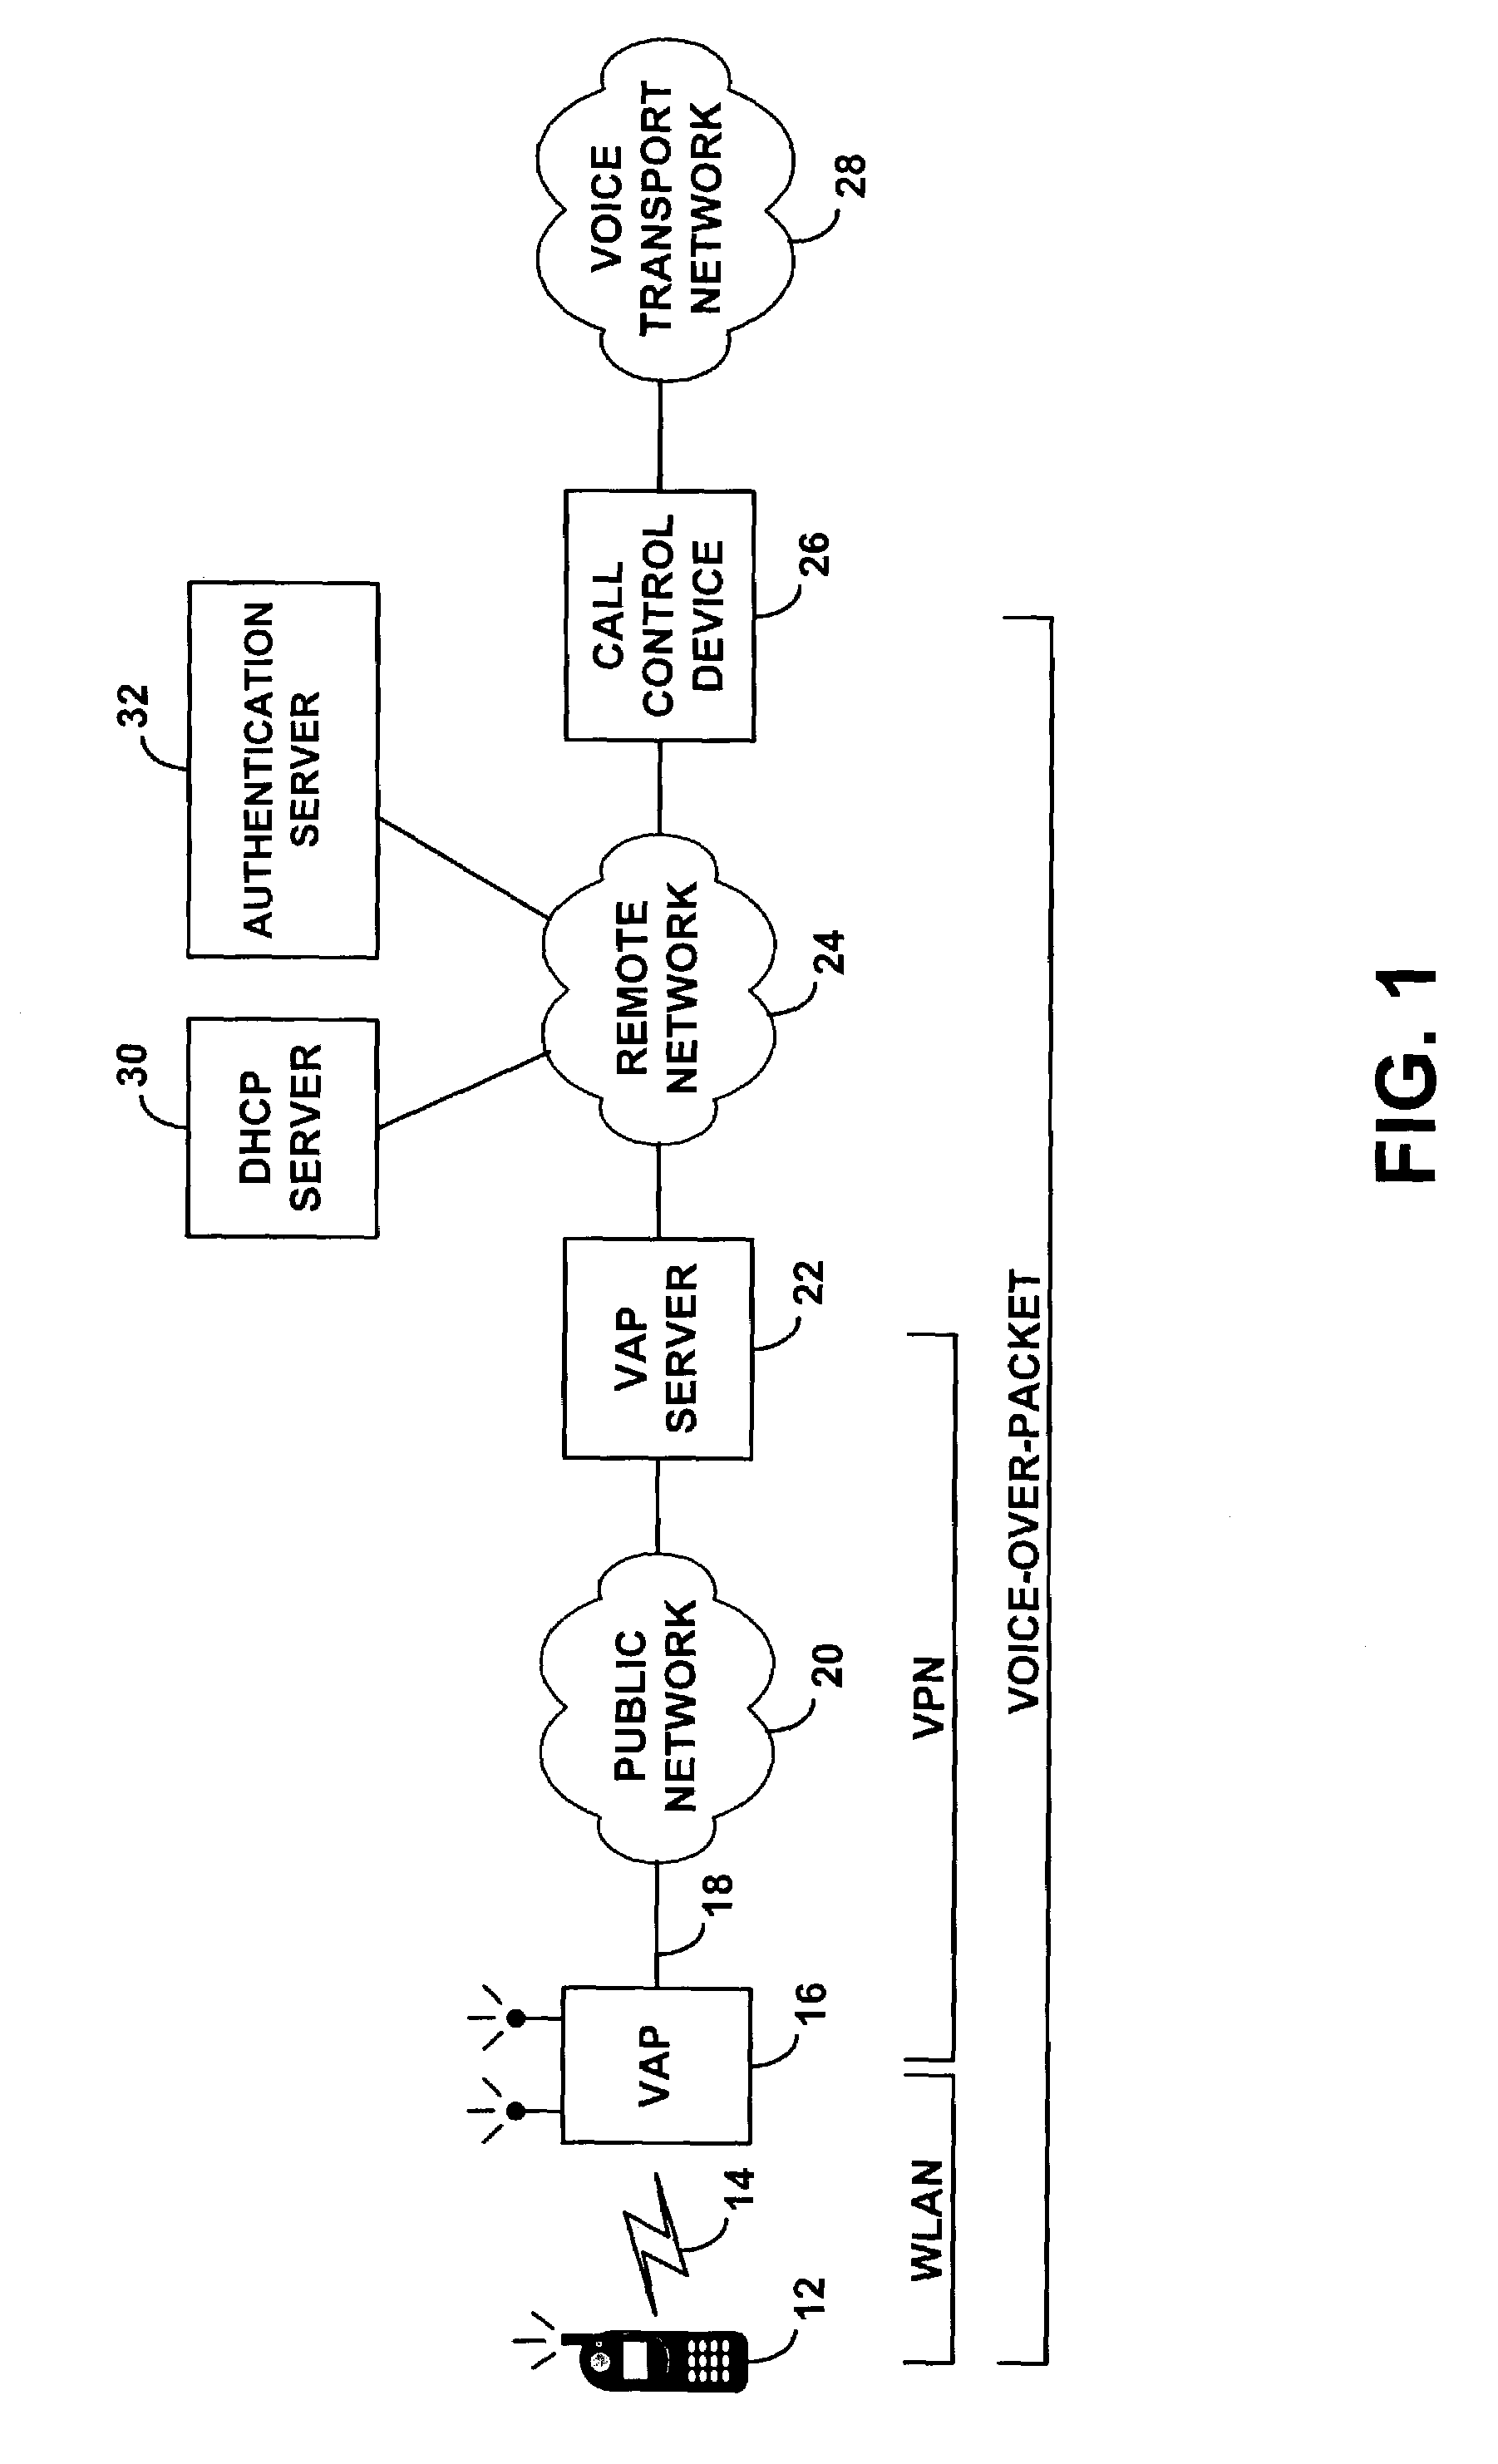 Method and system for providing remote telephone service via a wireless local area network